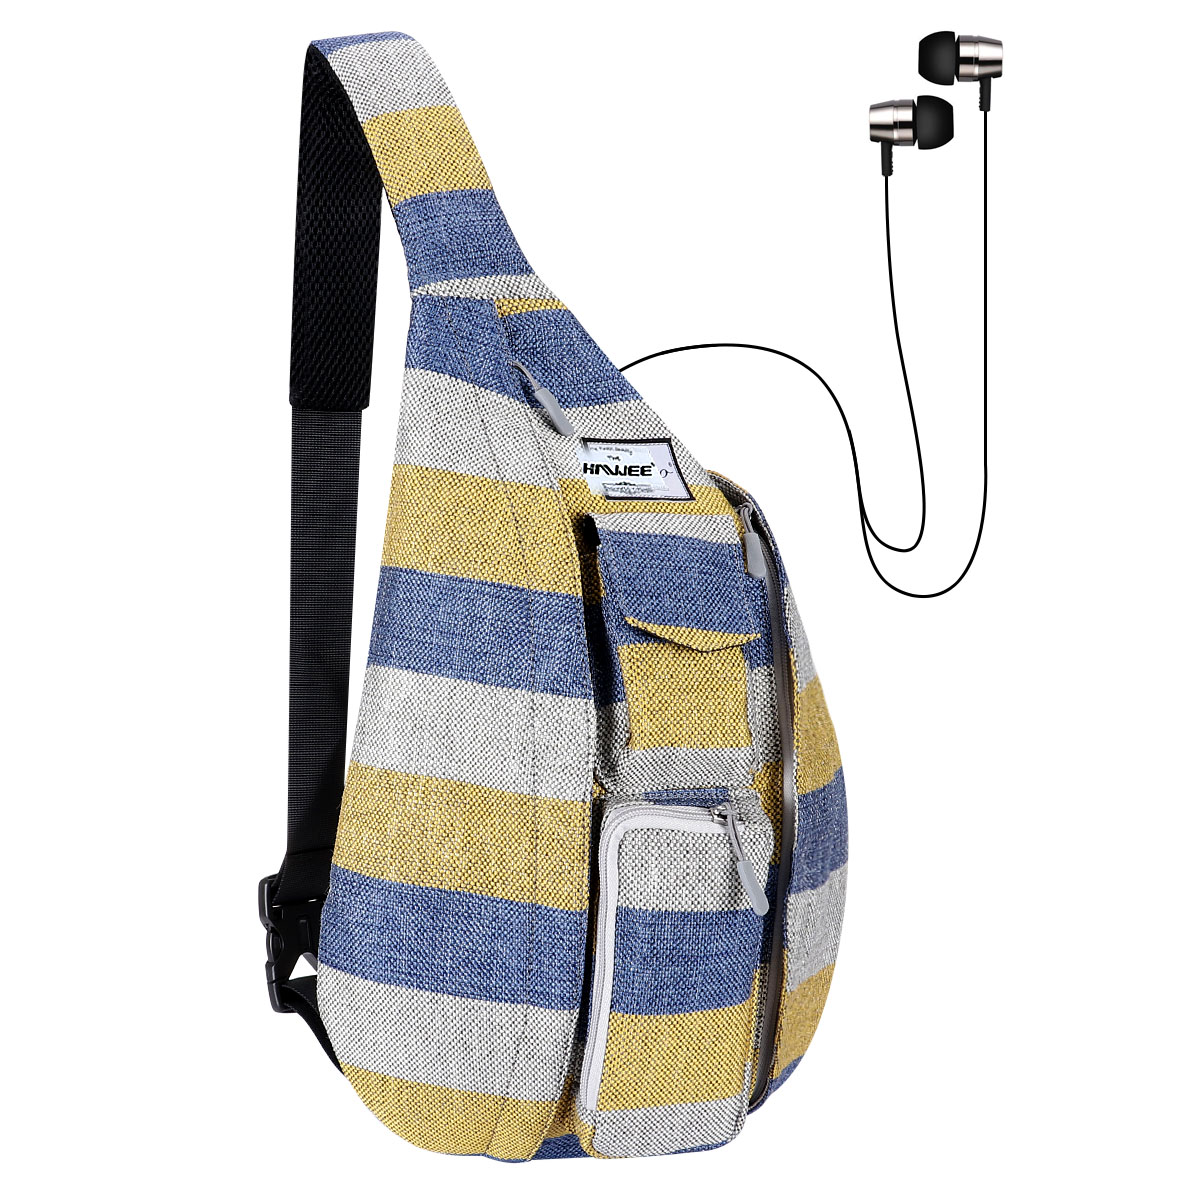 HAWEE Chest Daypack Hiking Backpack Sling Bag Sports Shoulder Travel Crossbody Daypack for Women, Wide Stripes of Yellow/ Blue/Gray - image 1 of 7